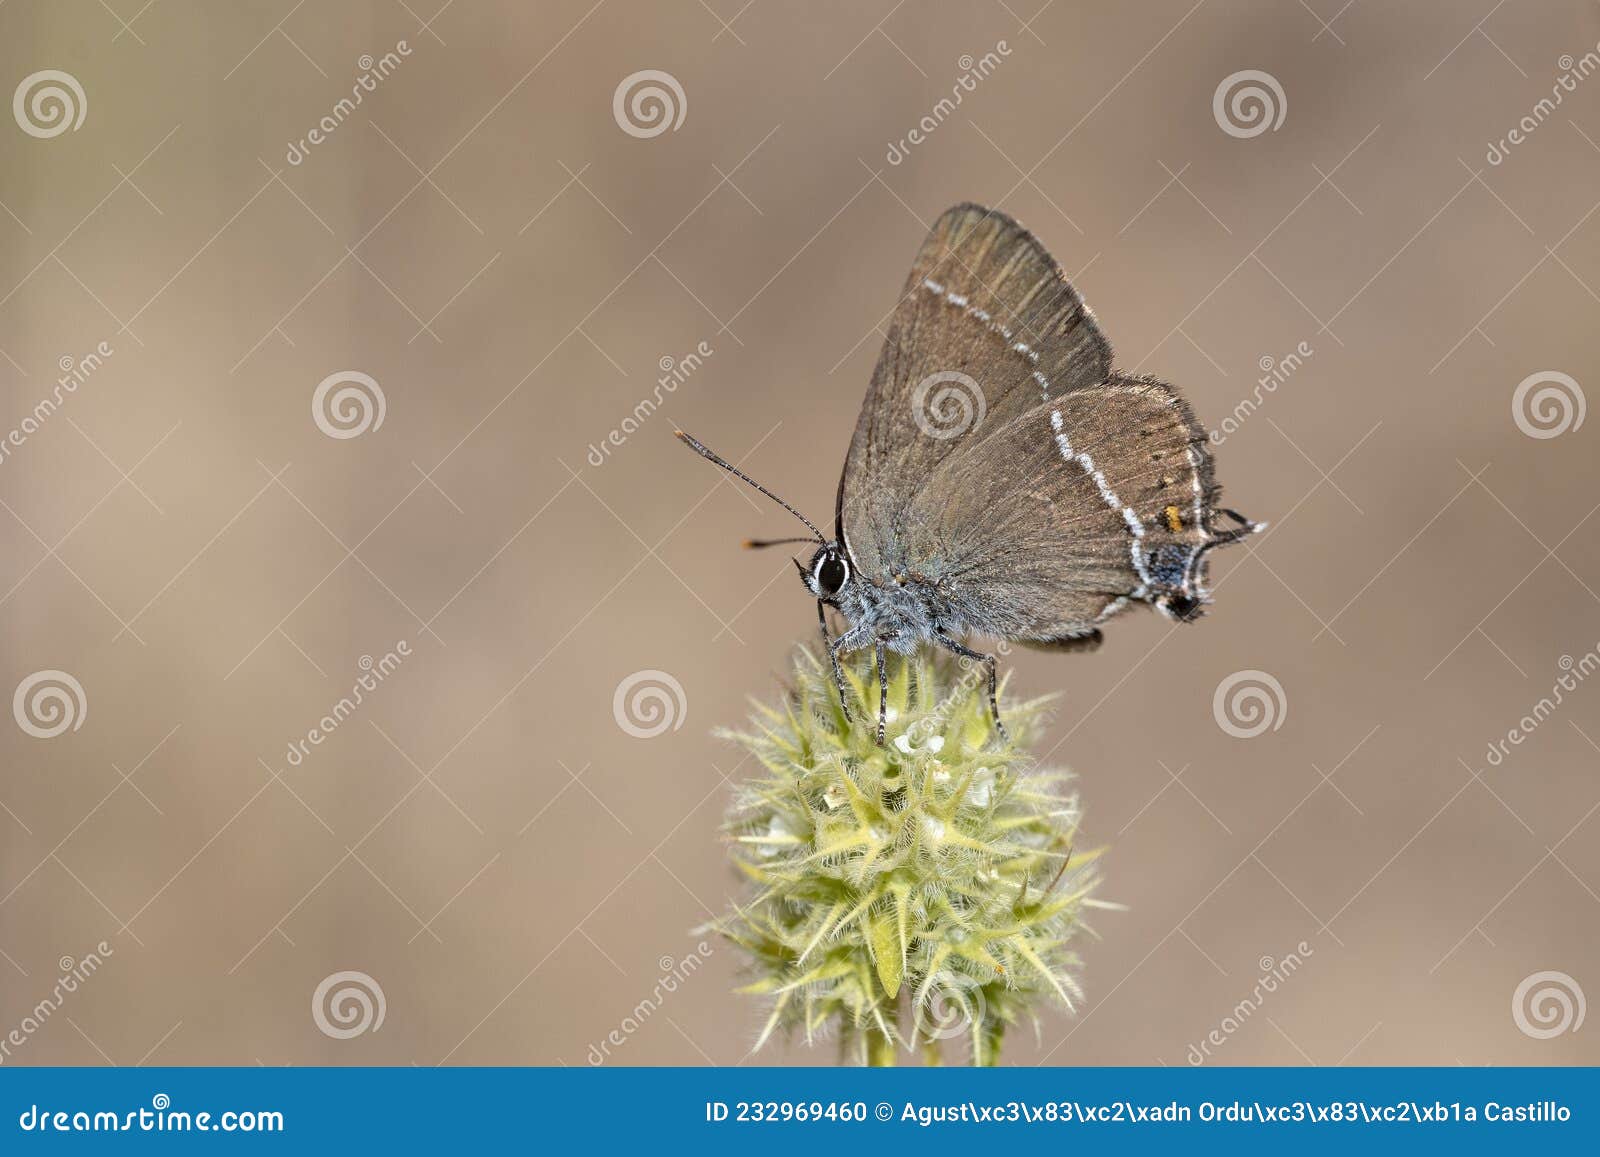 day butterfly perched on flower. neozephyrus quercus.